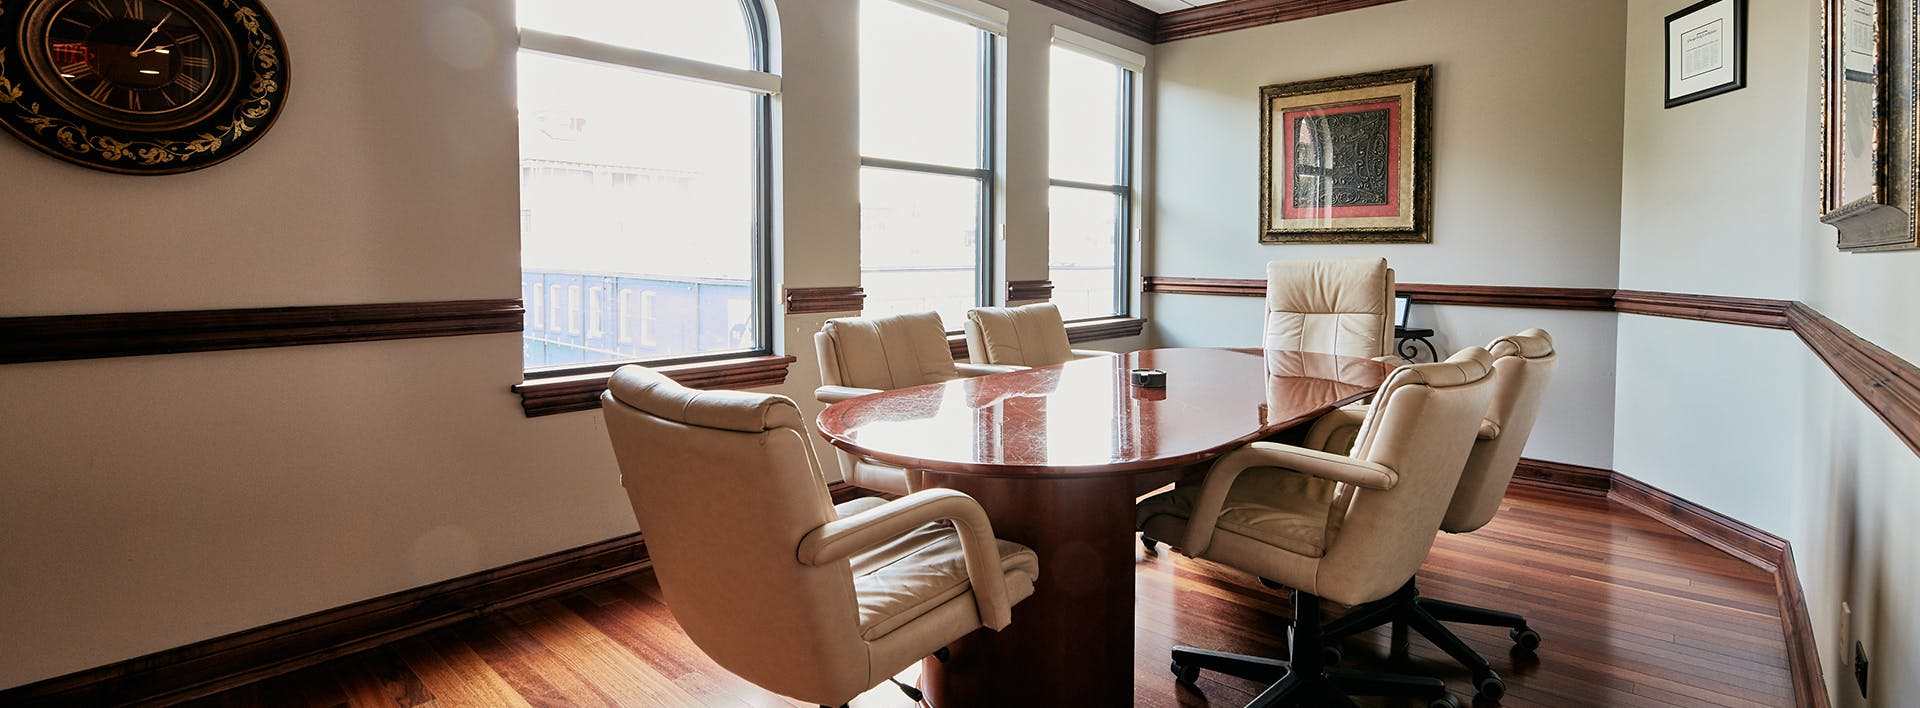 there is a large conference table with chairs in a room